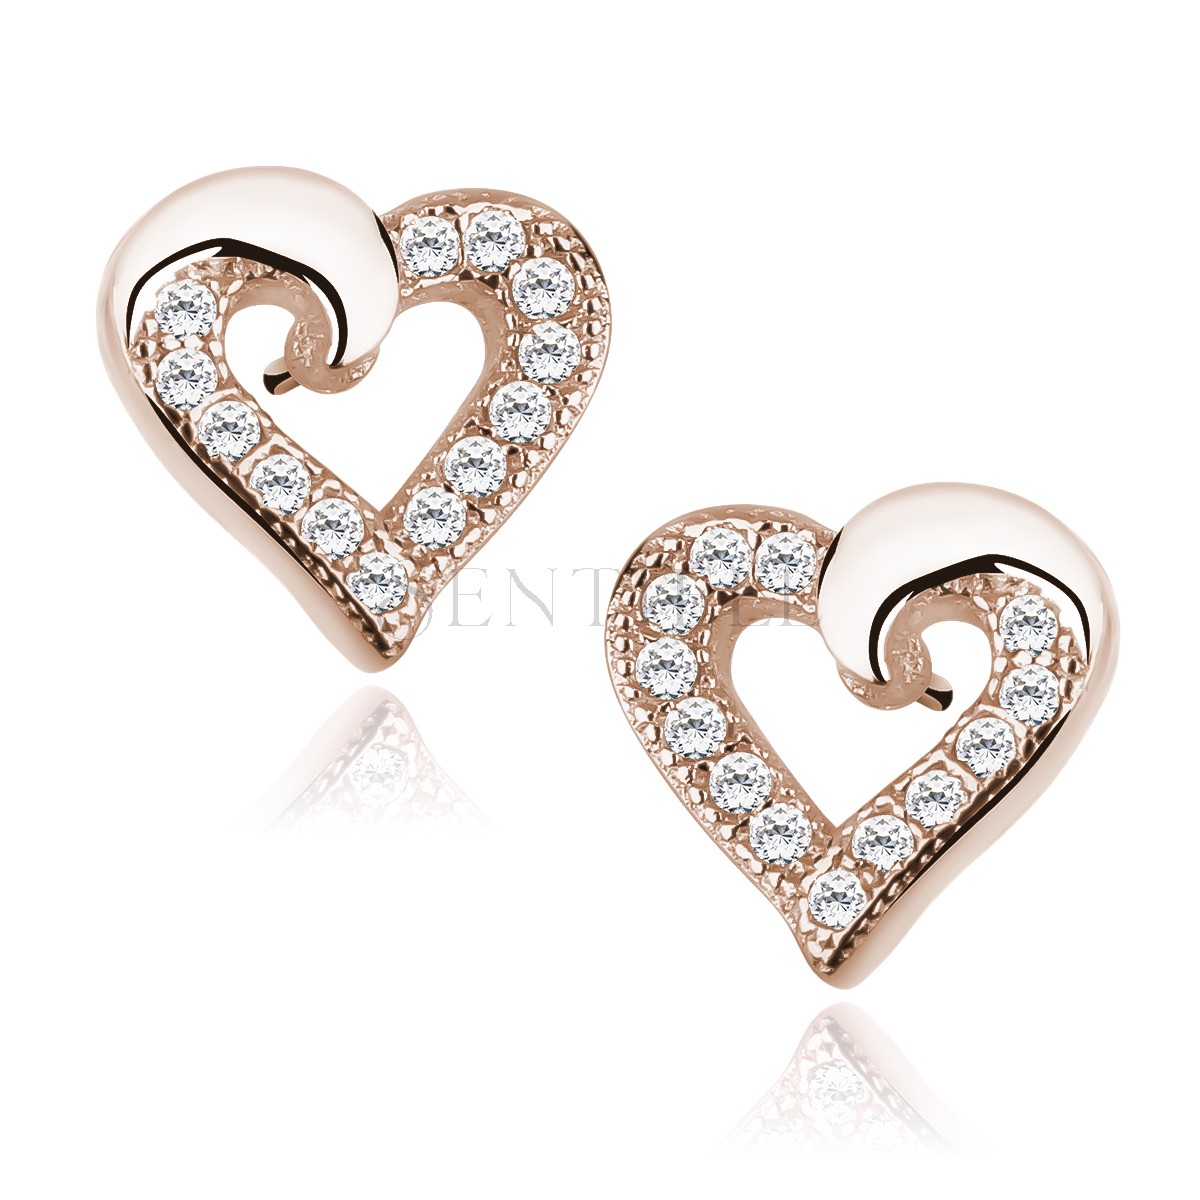 Silver And Rose Gold Heart Earrings Hotsell, 51% OFF | www 